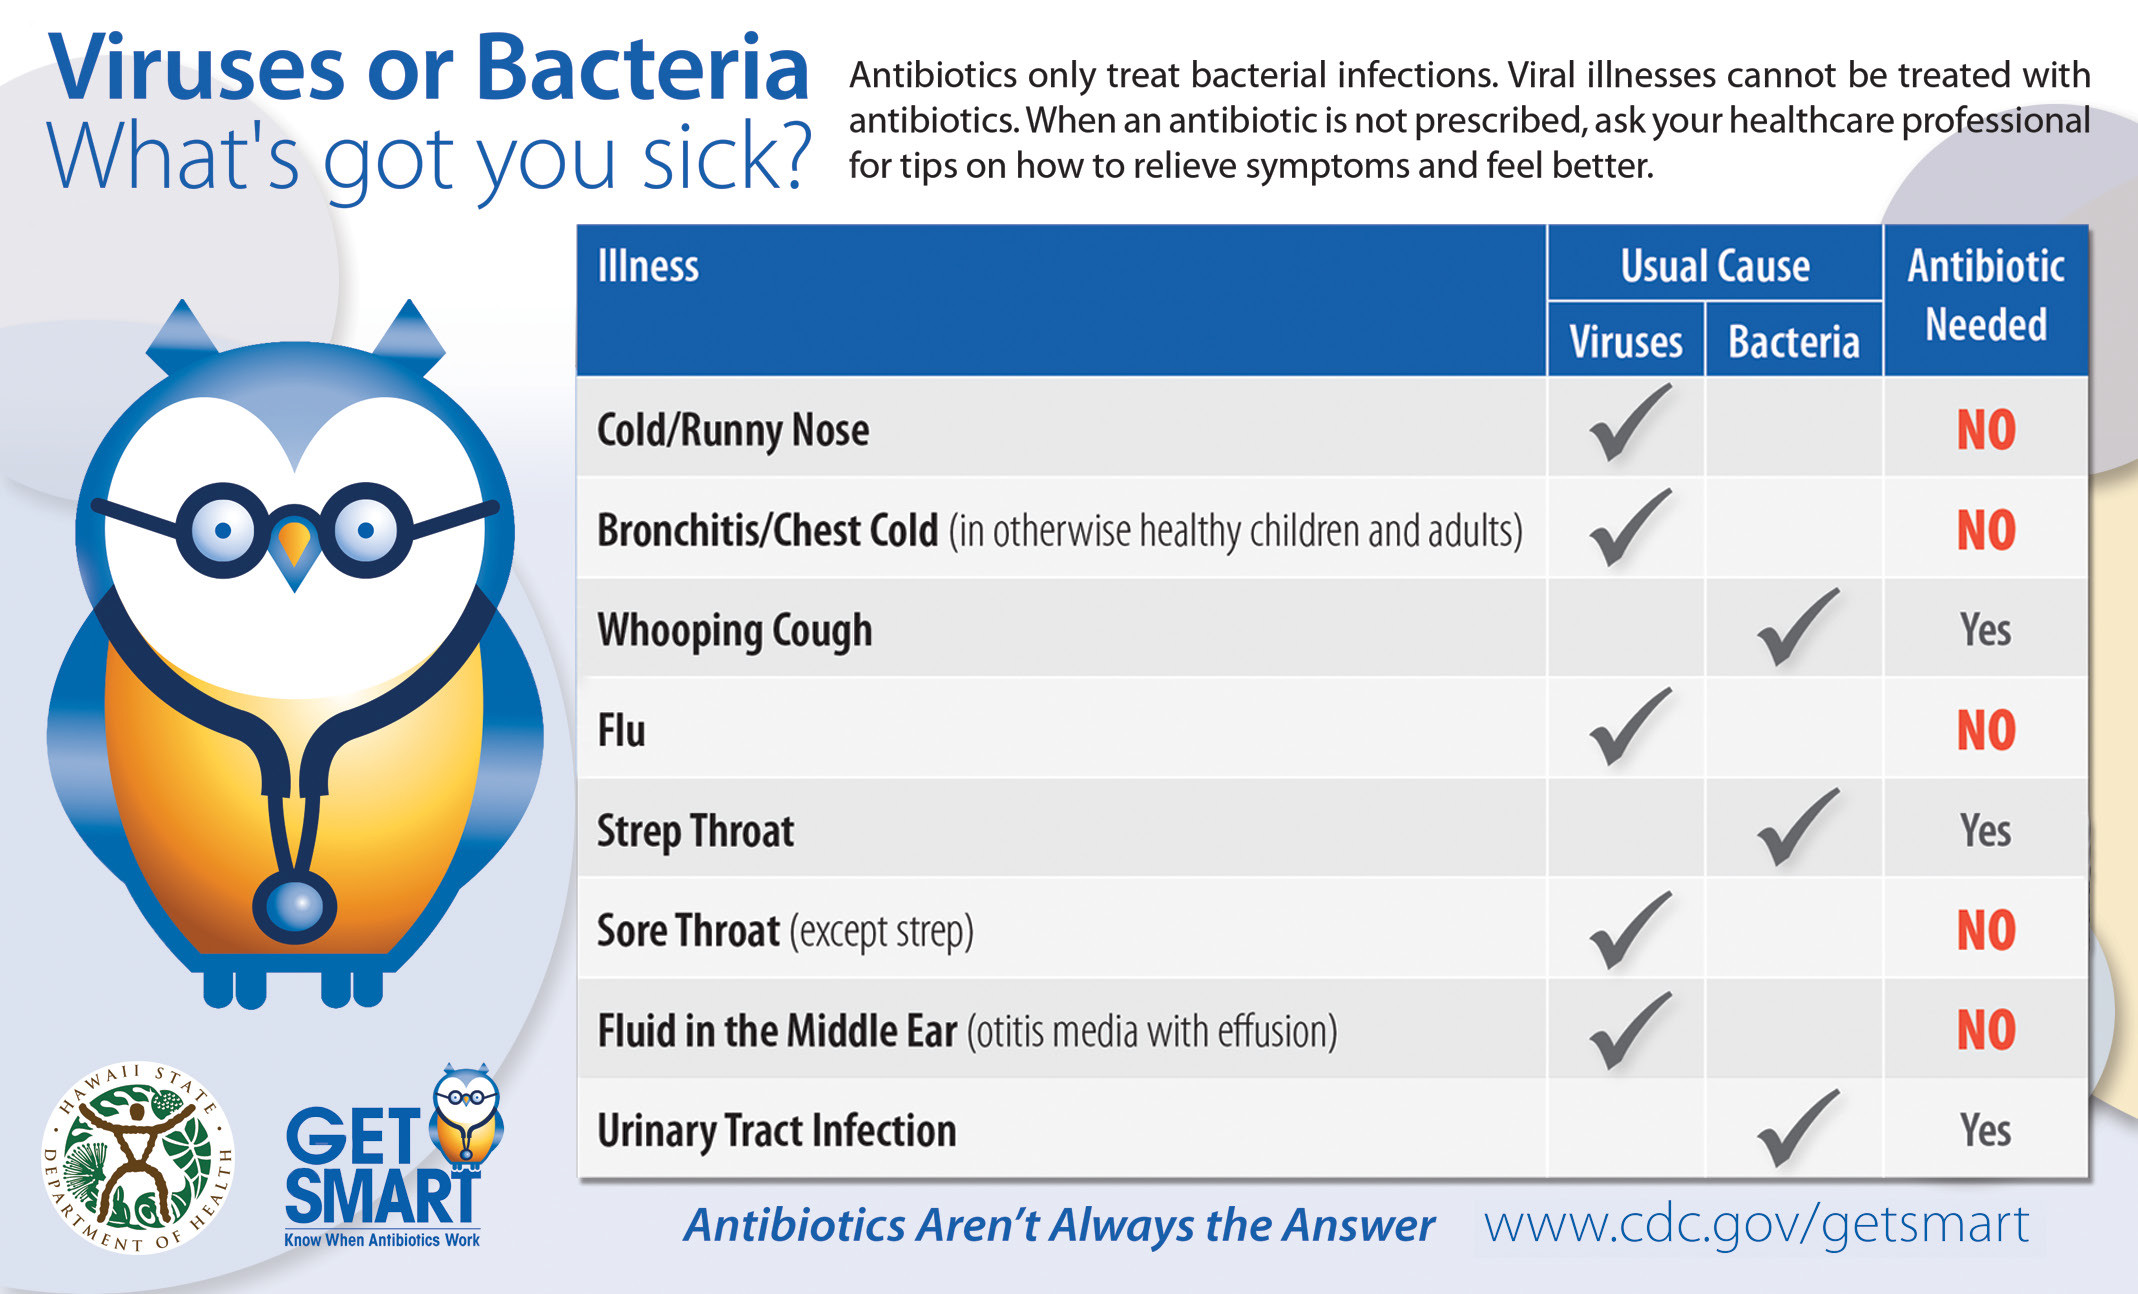 Viruses or bacteria: what's got you sick?